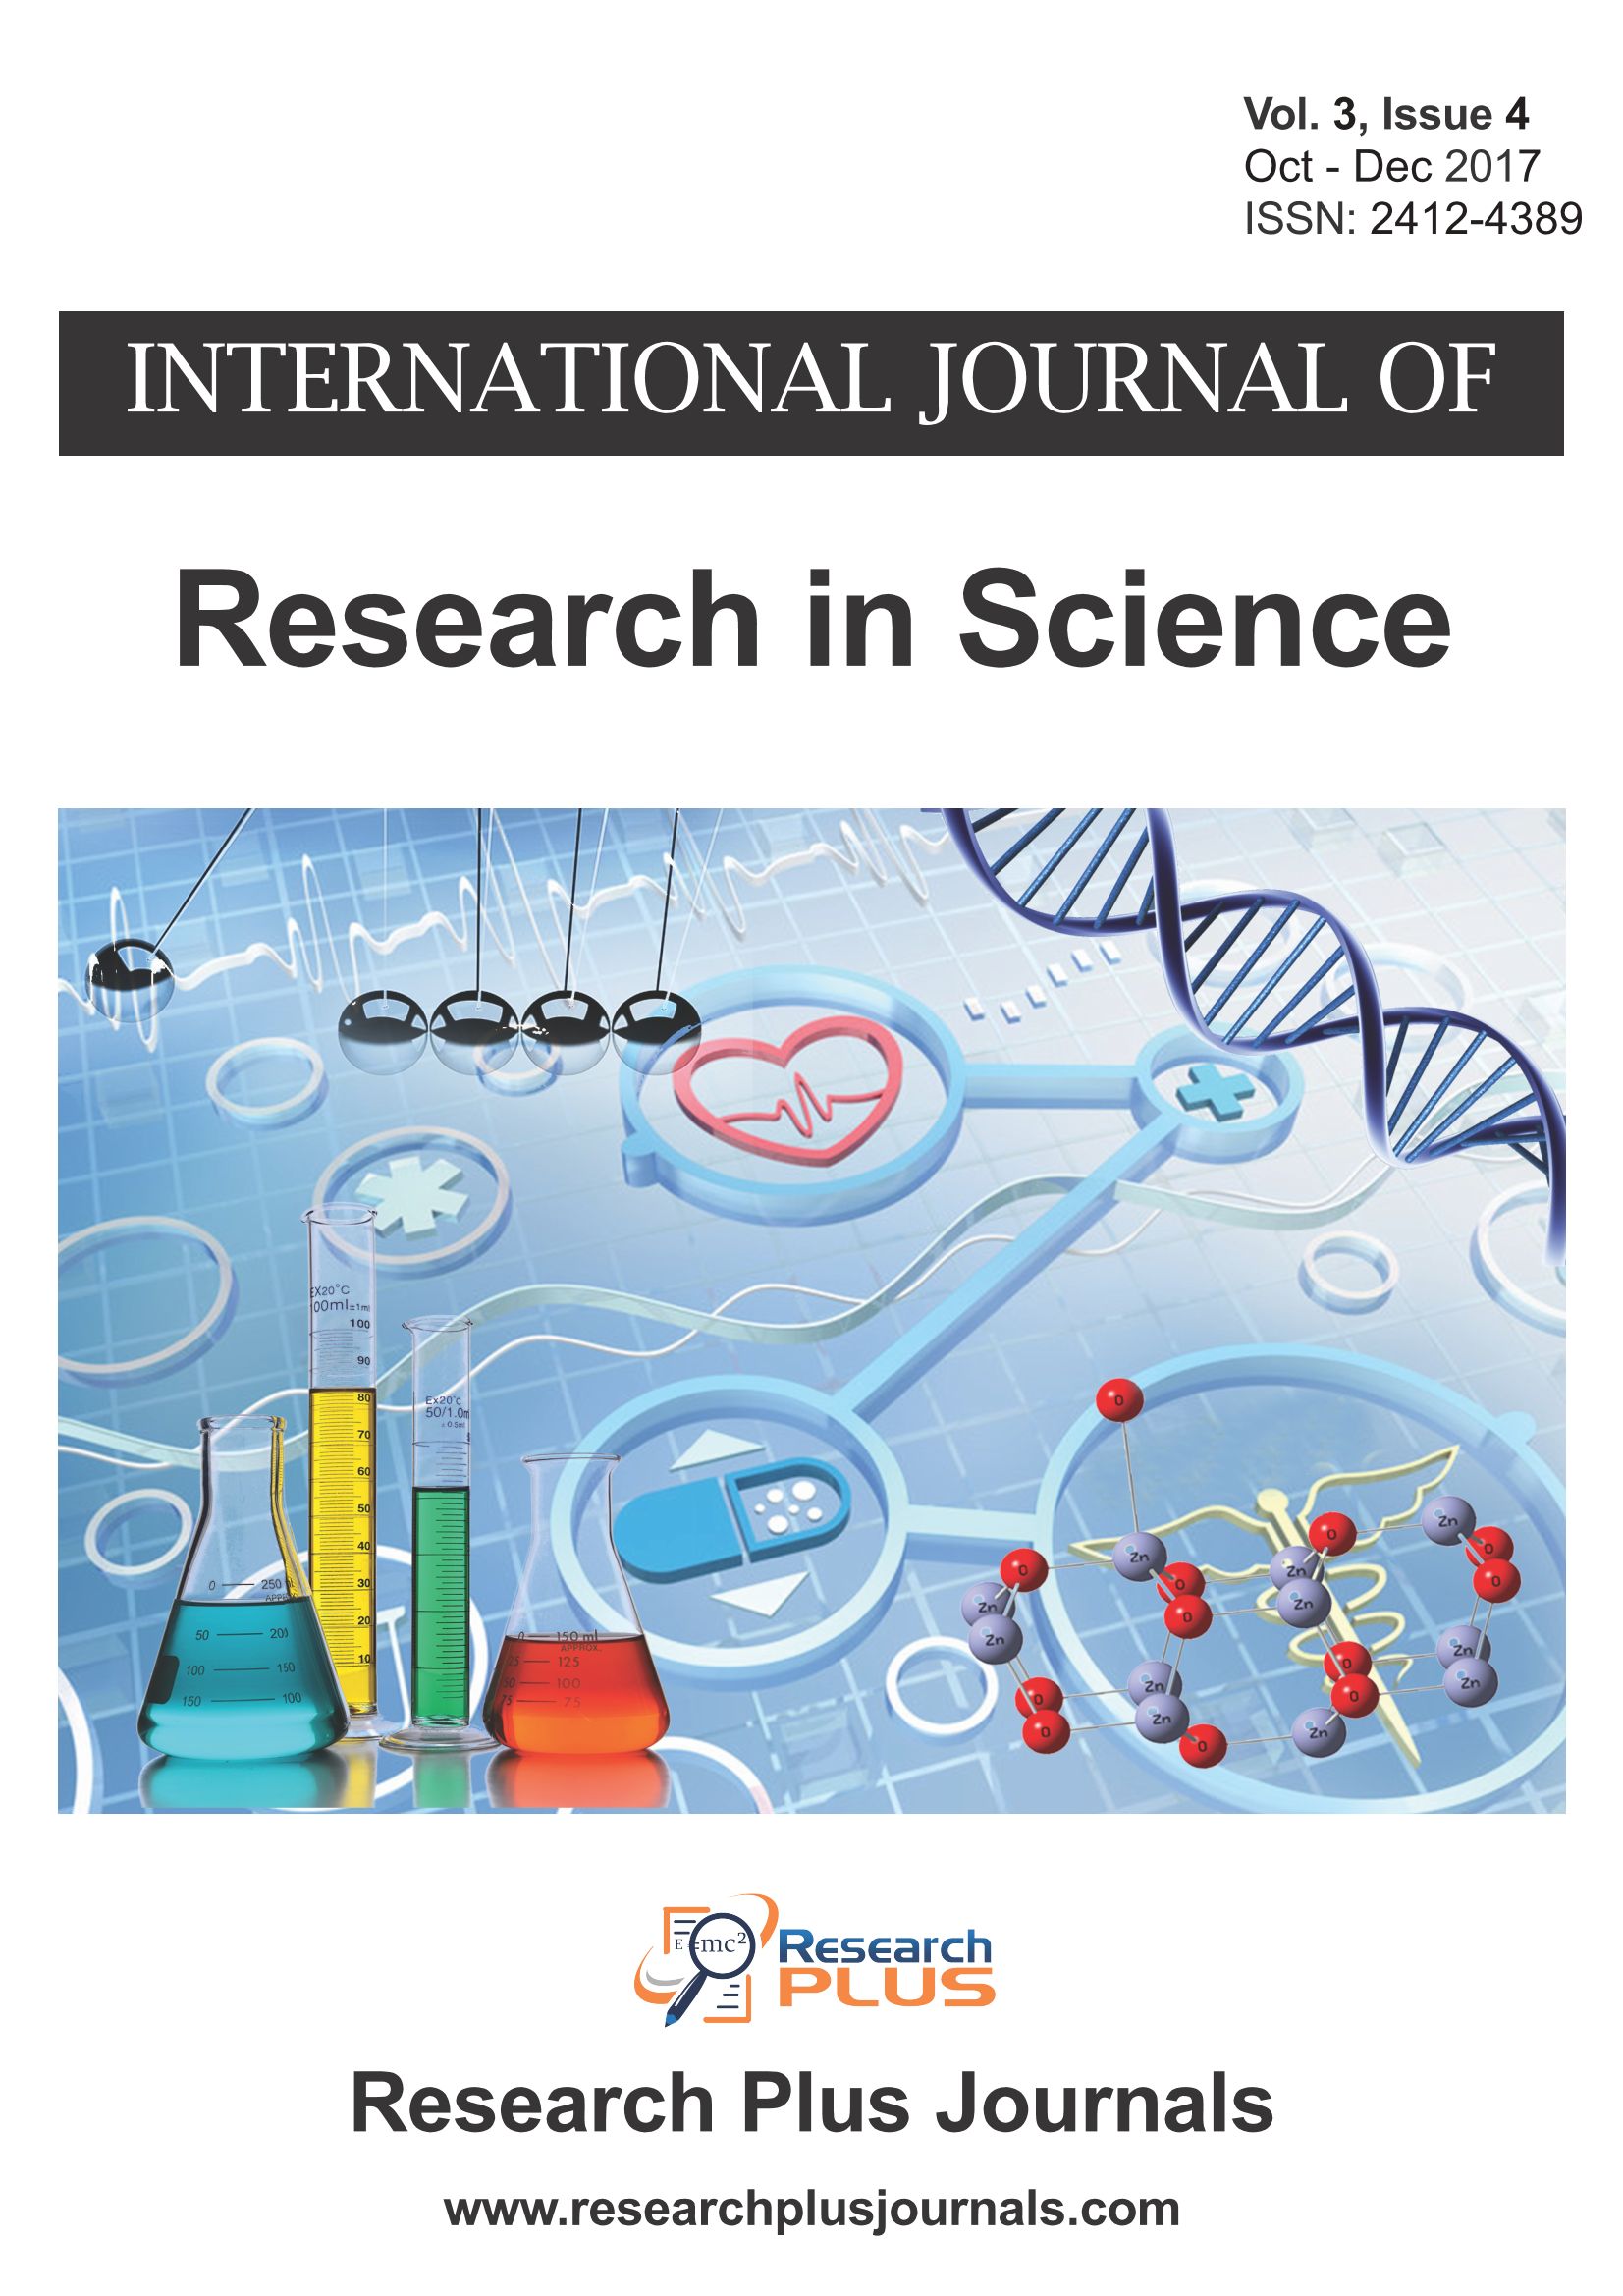 Volume 3, Issue 4, International Journal of Research in Science (IJRS) (Online ISSN 2412-4389)